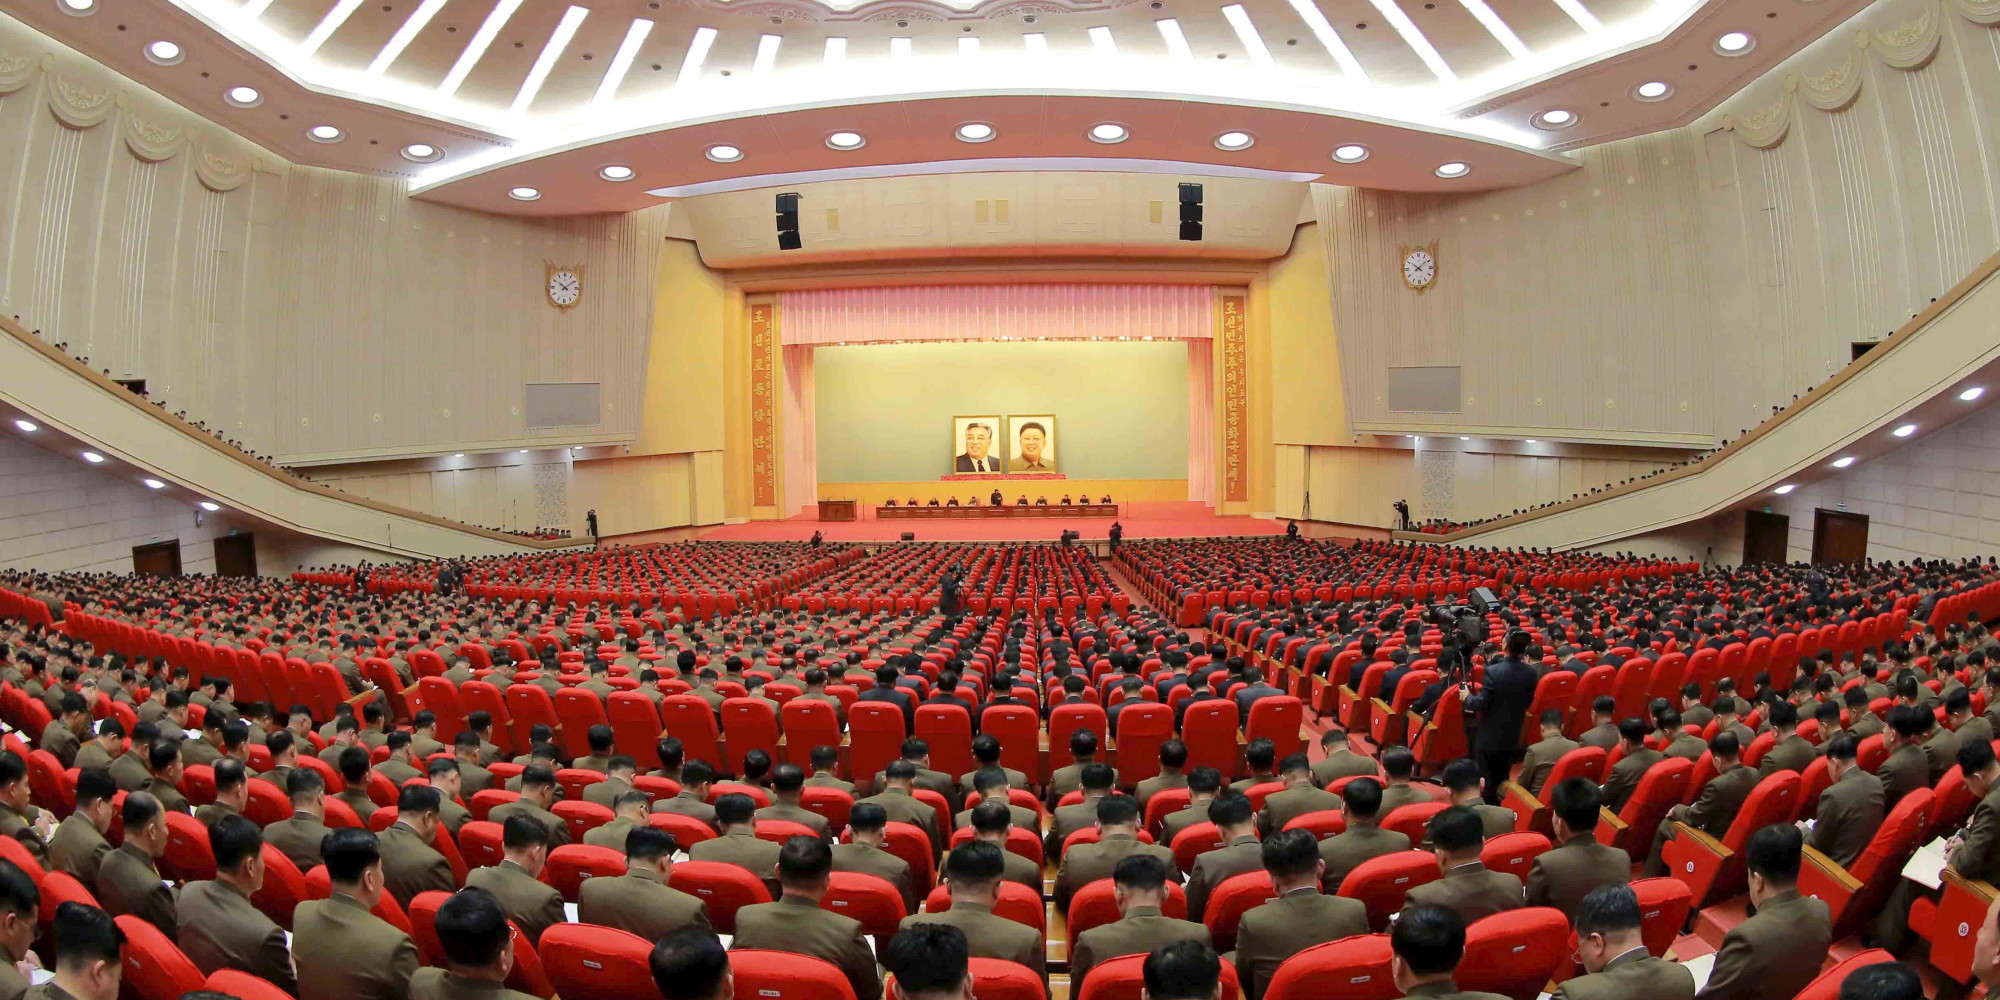 North Korea Trumps U.S. With Coming Party Congress | HuffPost